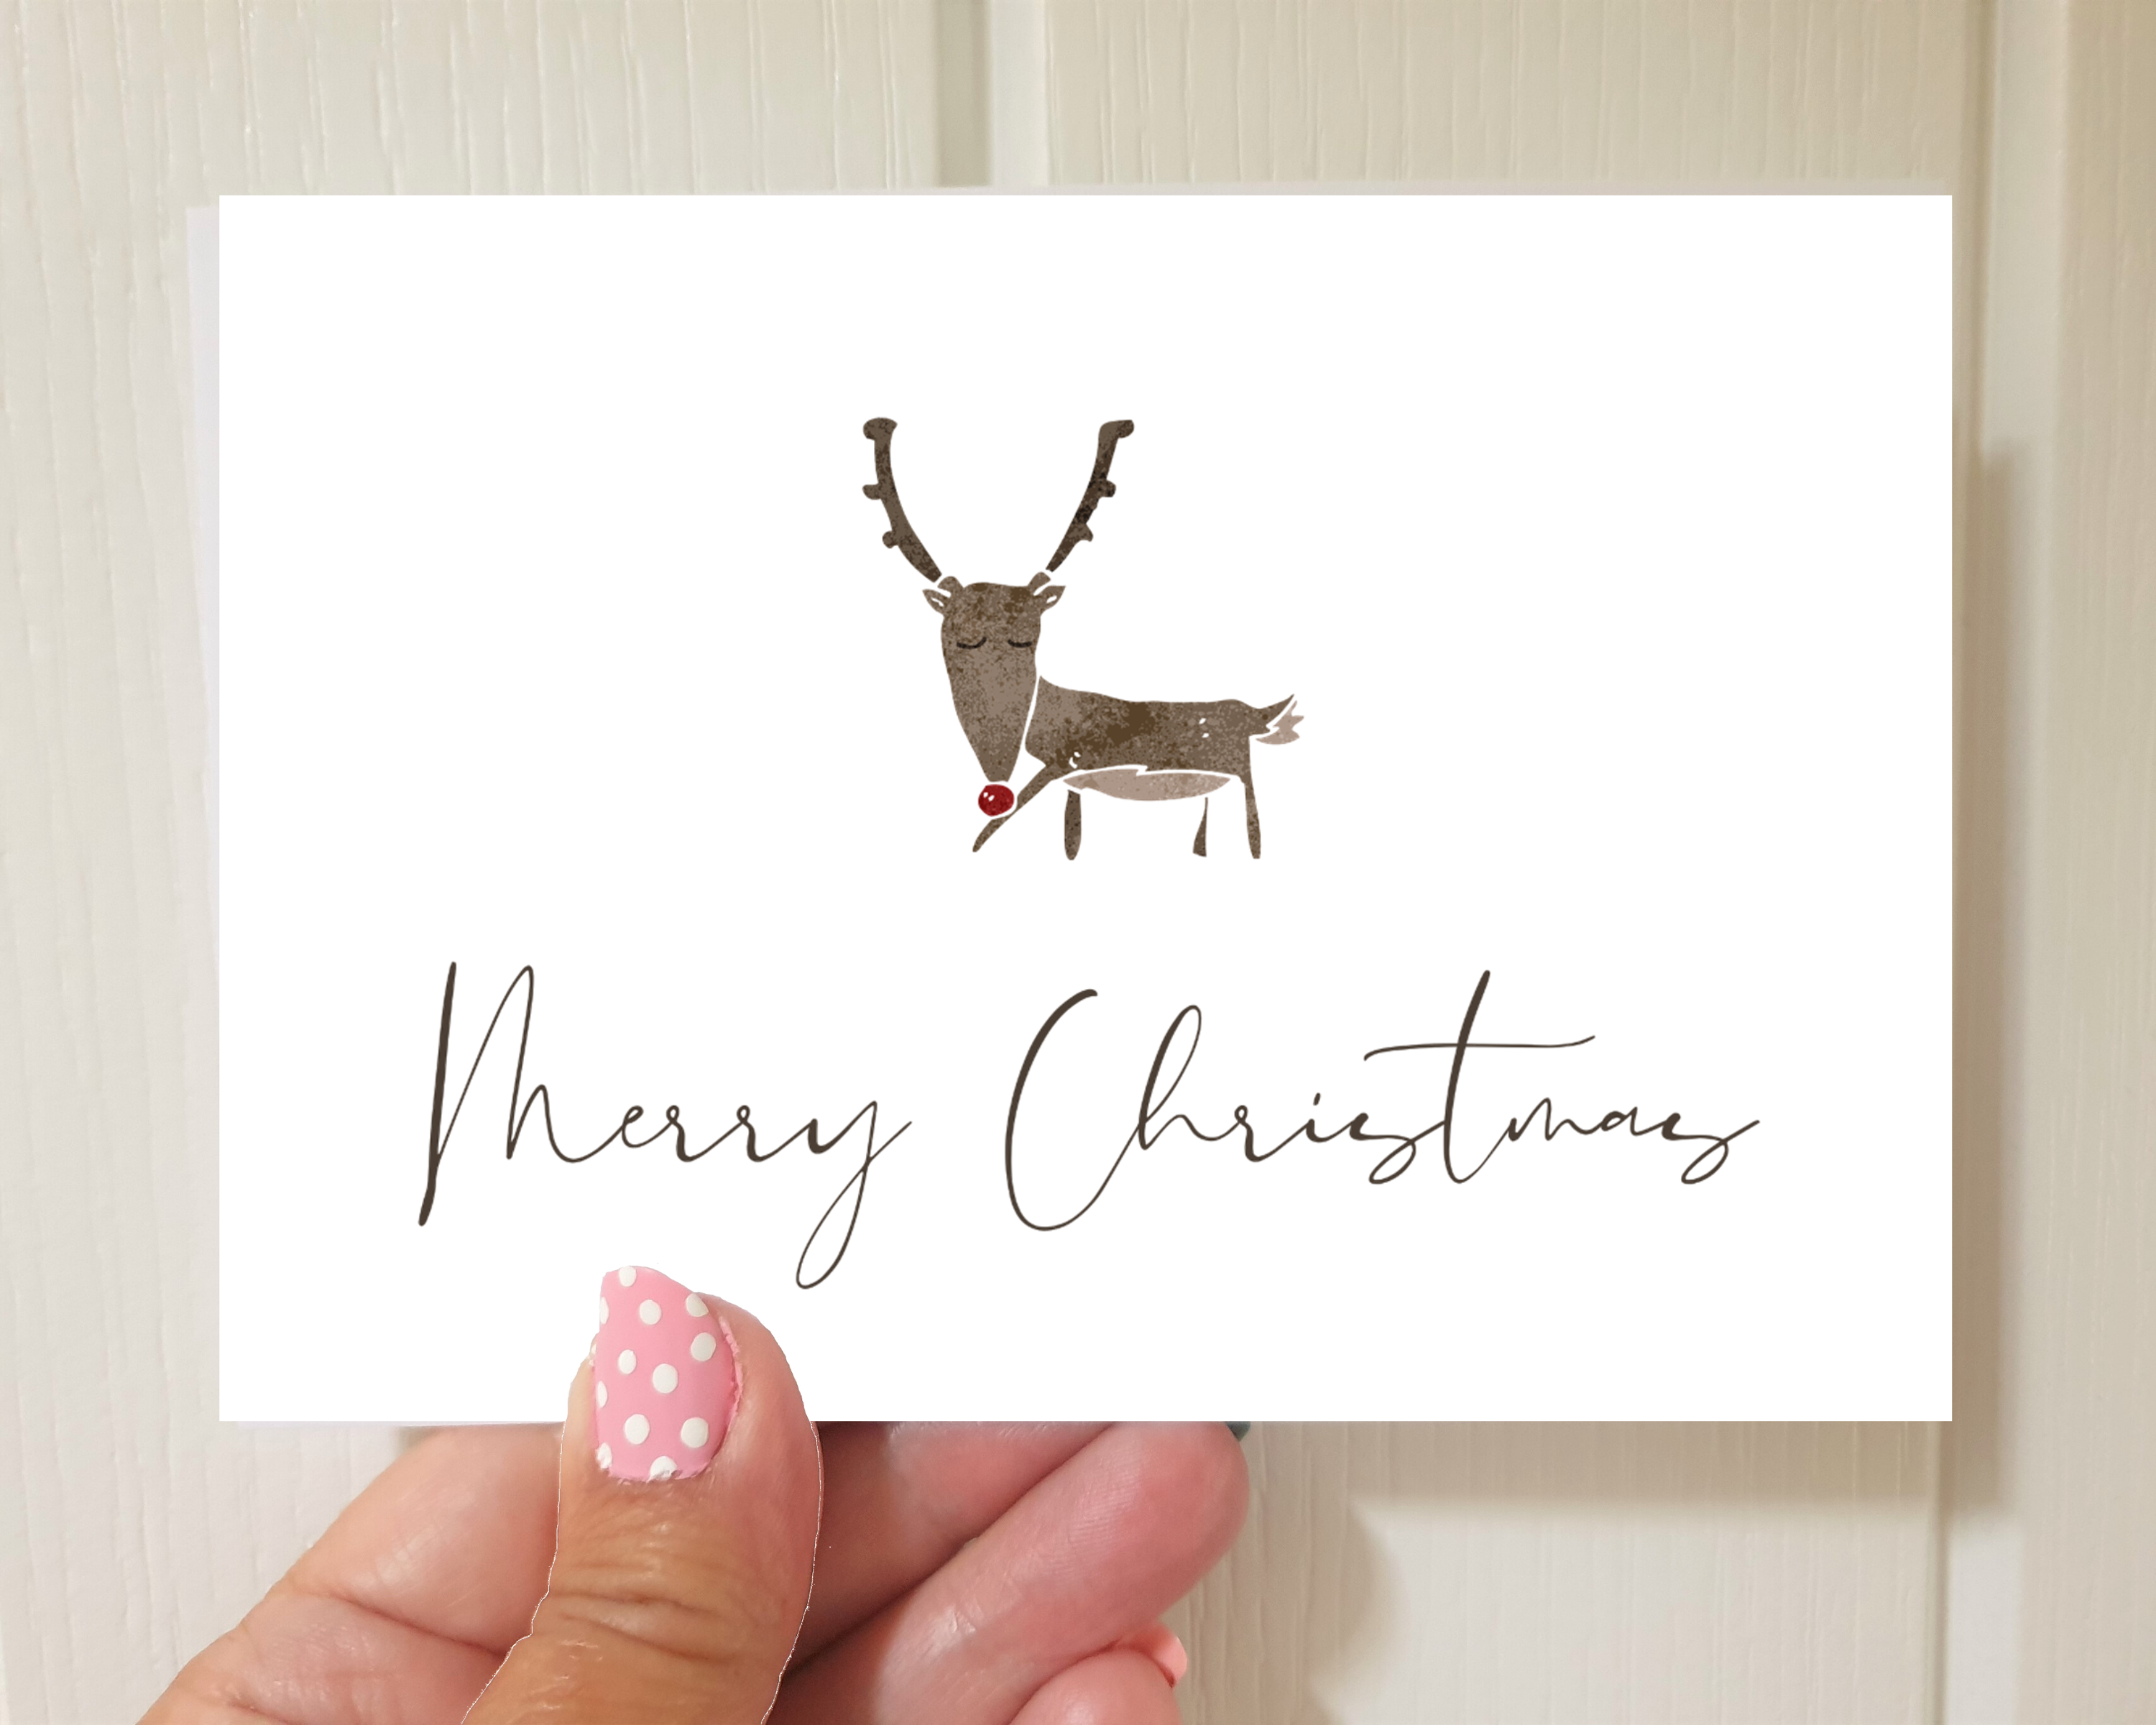 Poppleberry A6 Watercolour Reindeer Illustration Christmas Cards on White Cardstock, size compared to thumb.